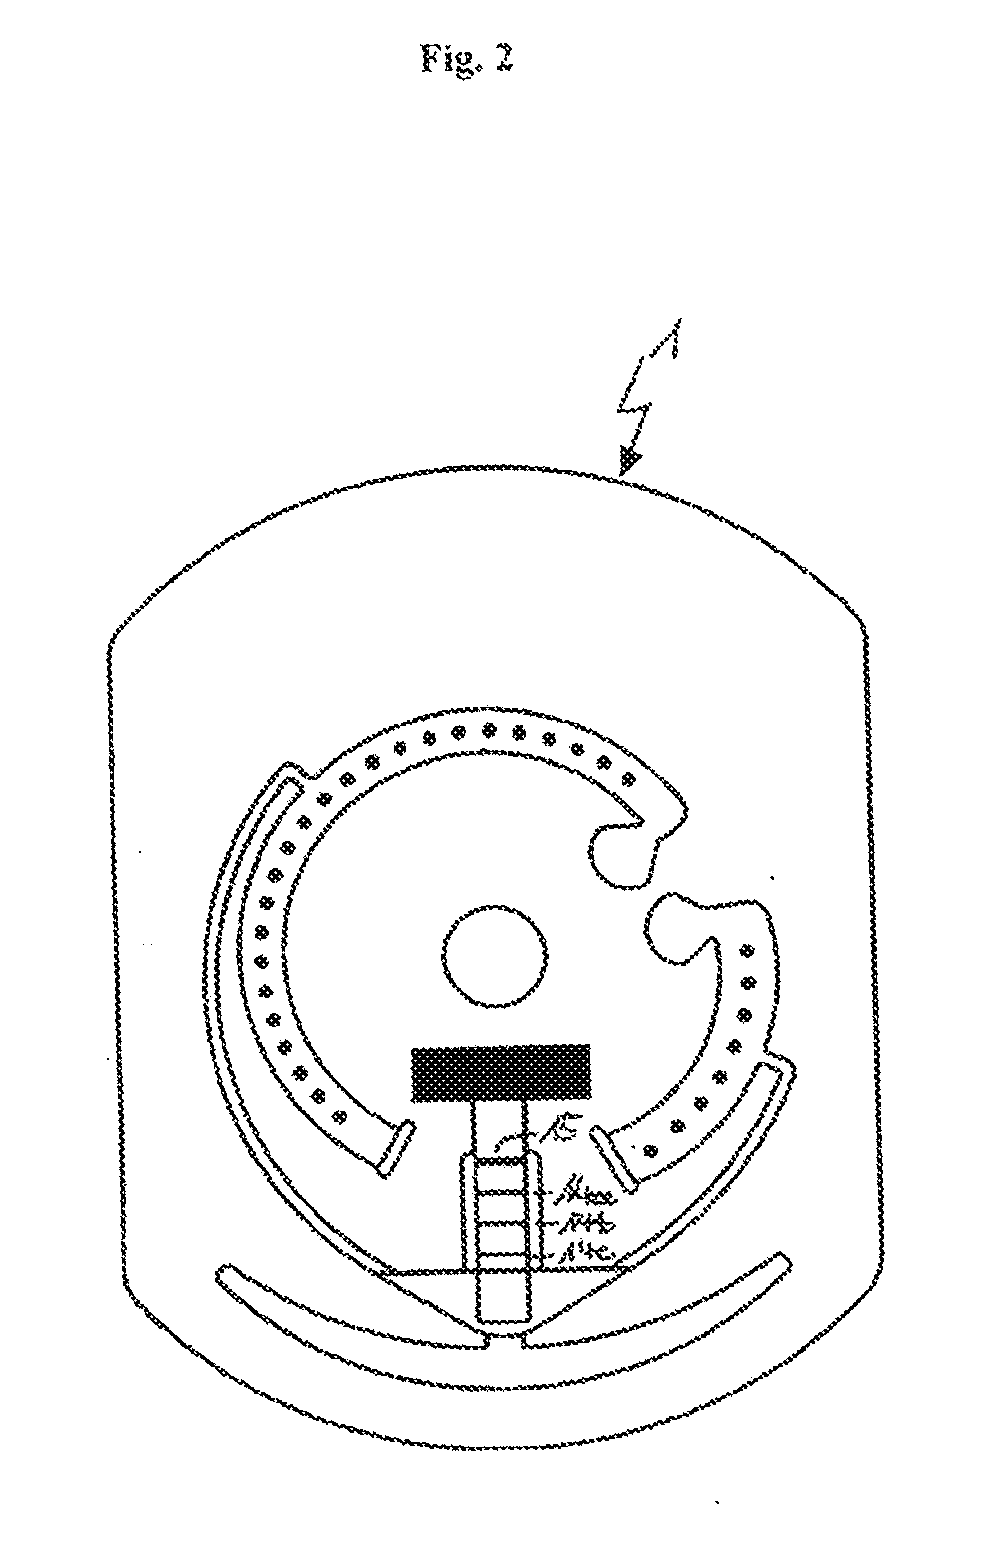 Test Element Having Combined Control and Calibration Zone